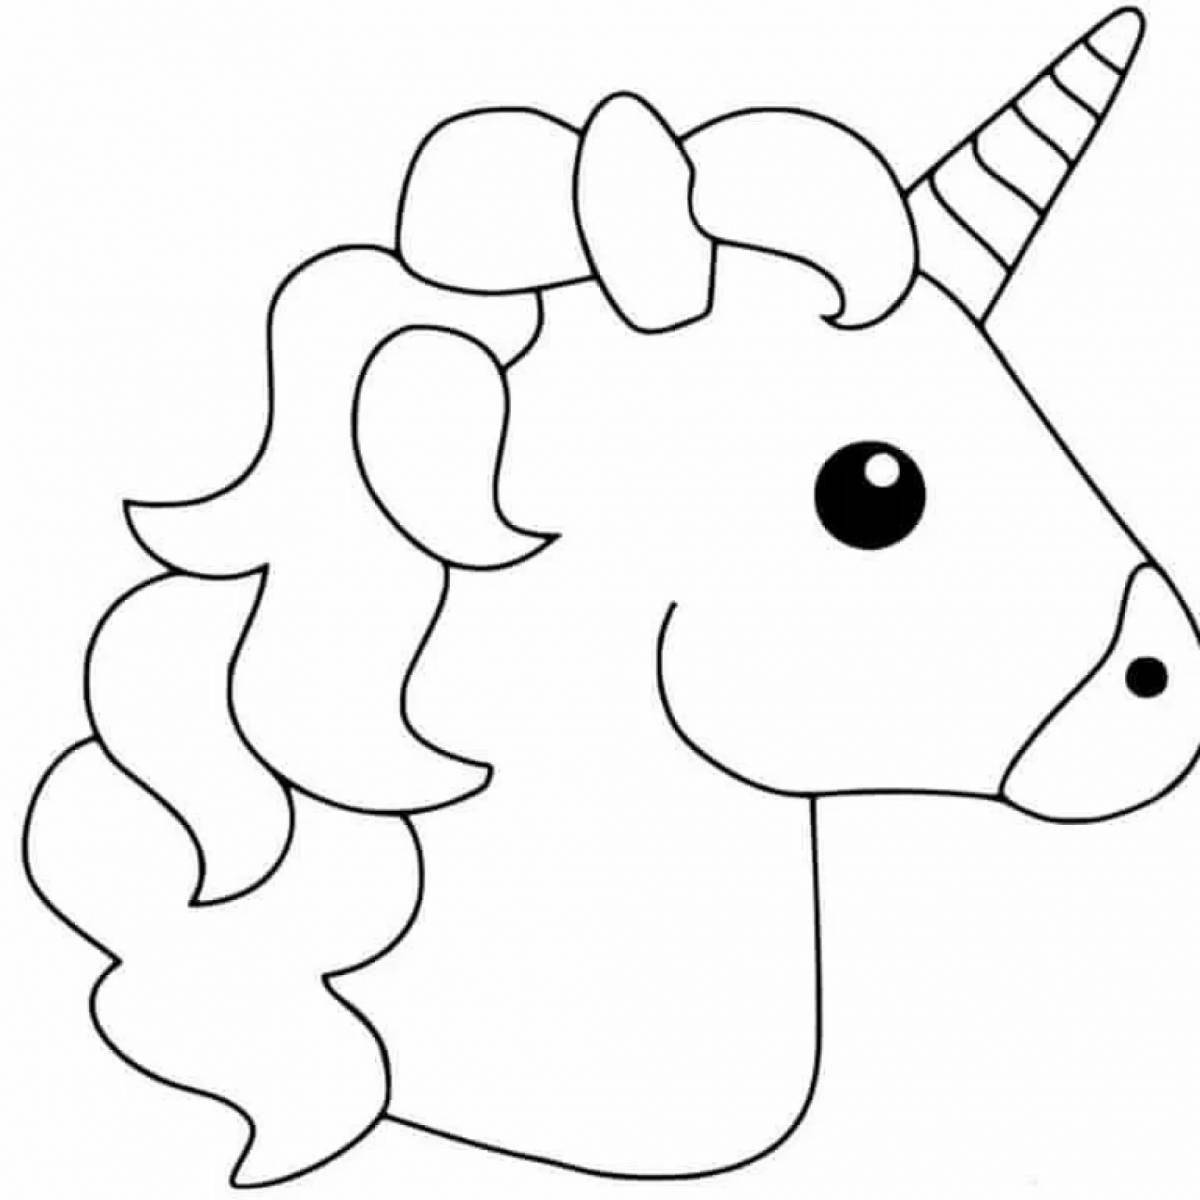 Animated coloring drawing of a unicorn